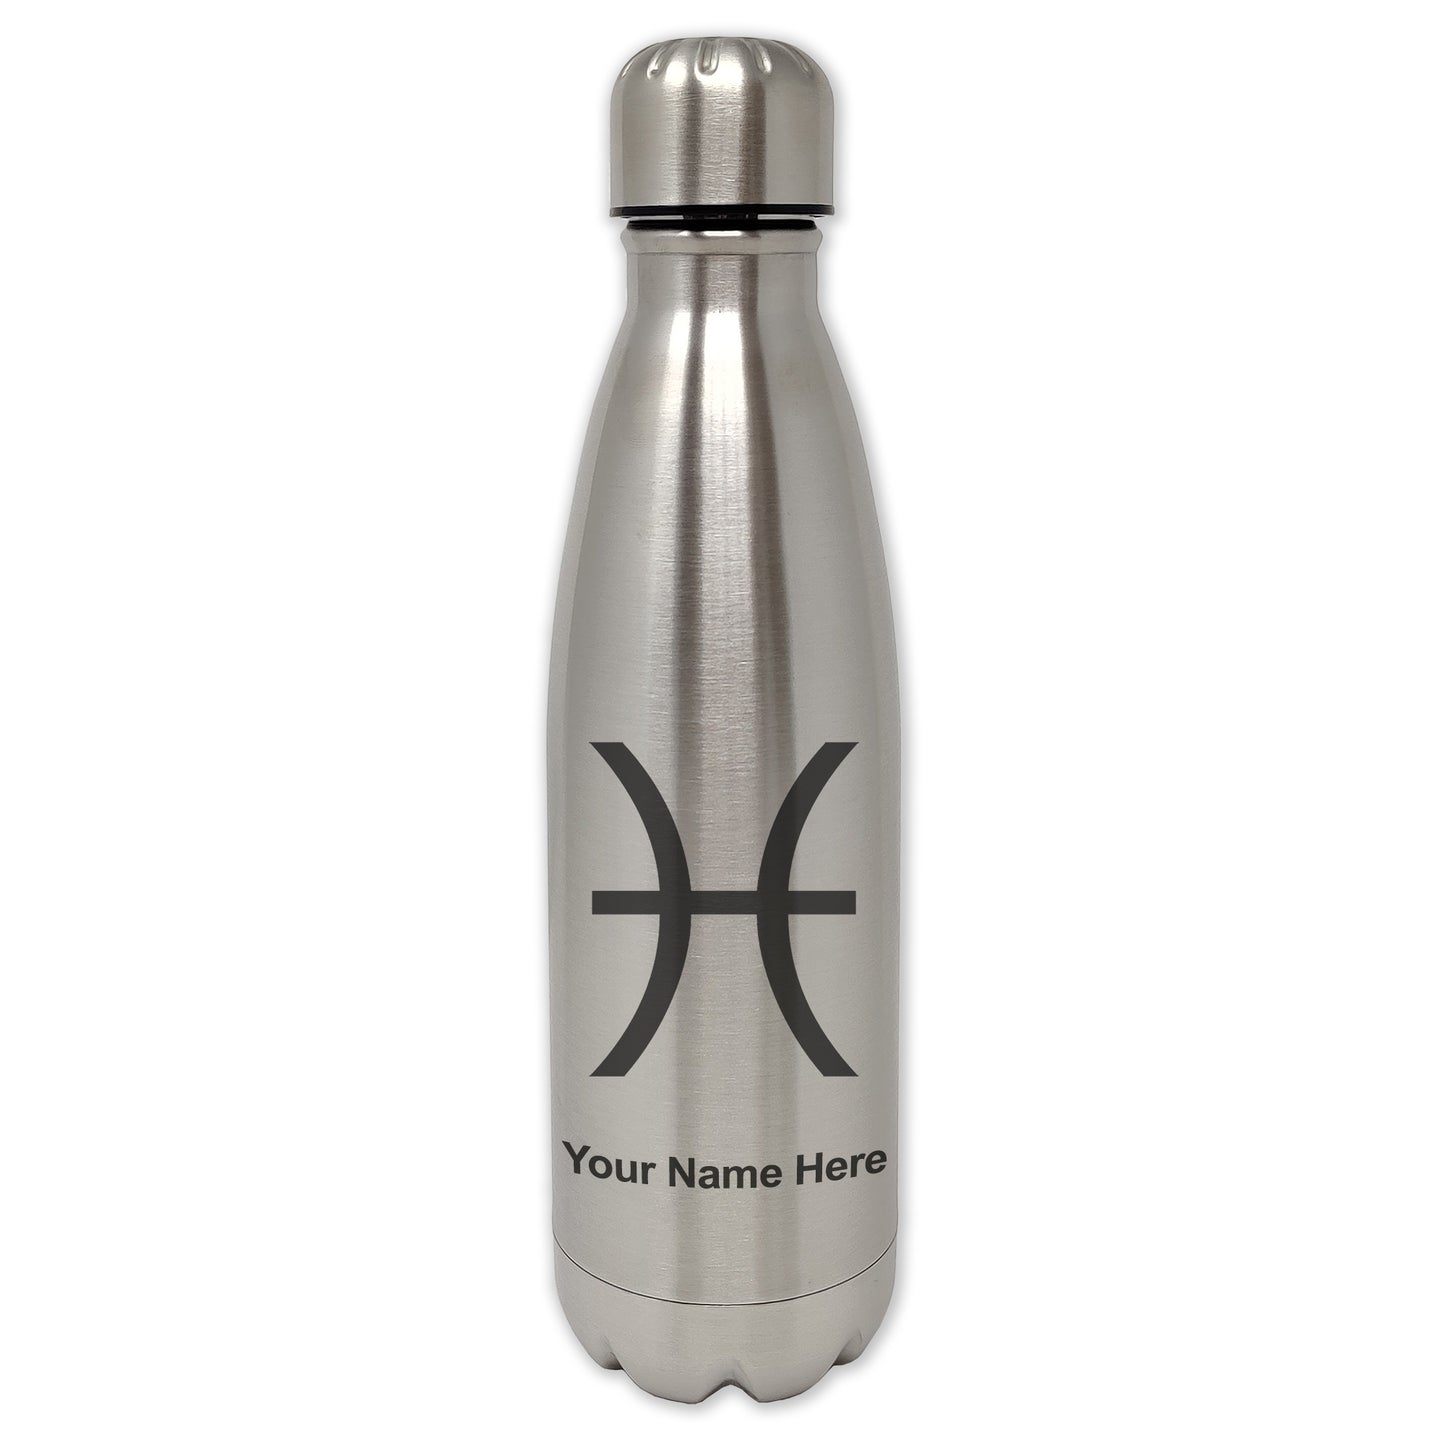 LaserGram Single Wall Water Bottle, Zodiac Sign Pisces, Personalized Engraving Included